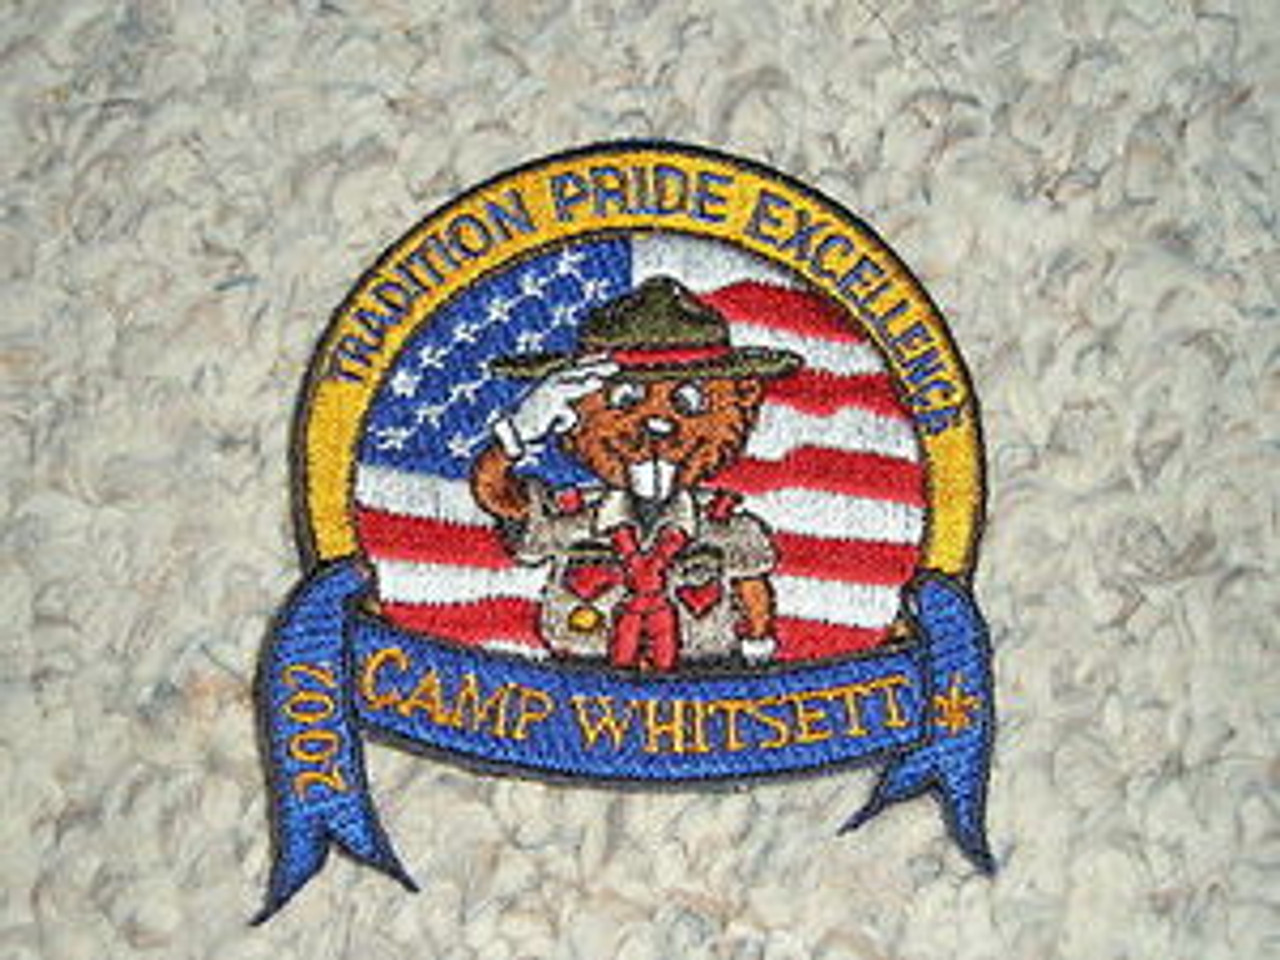 2002 Camp Whitsett Patch - Scout